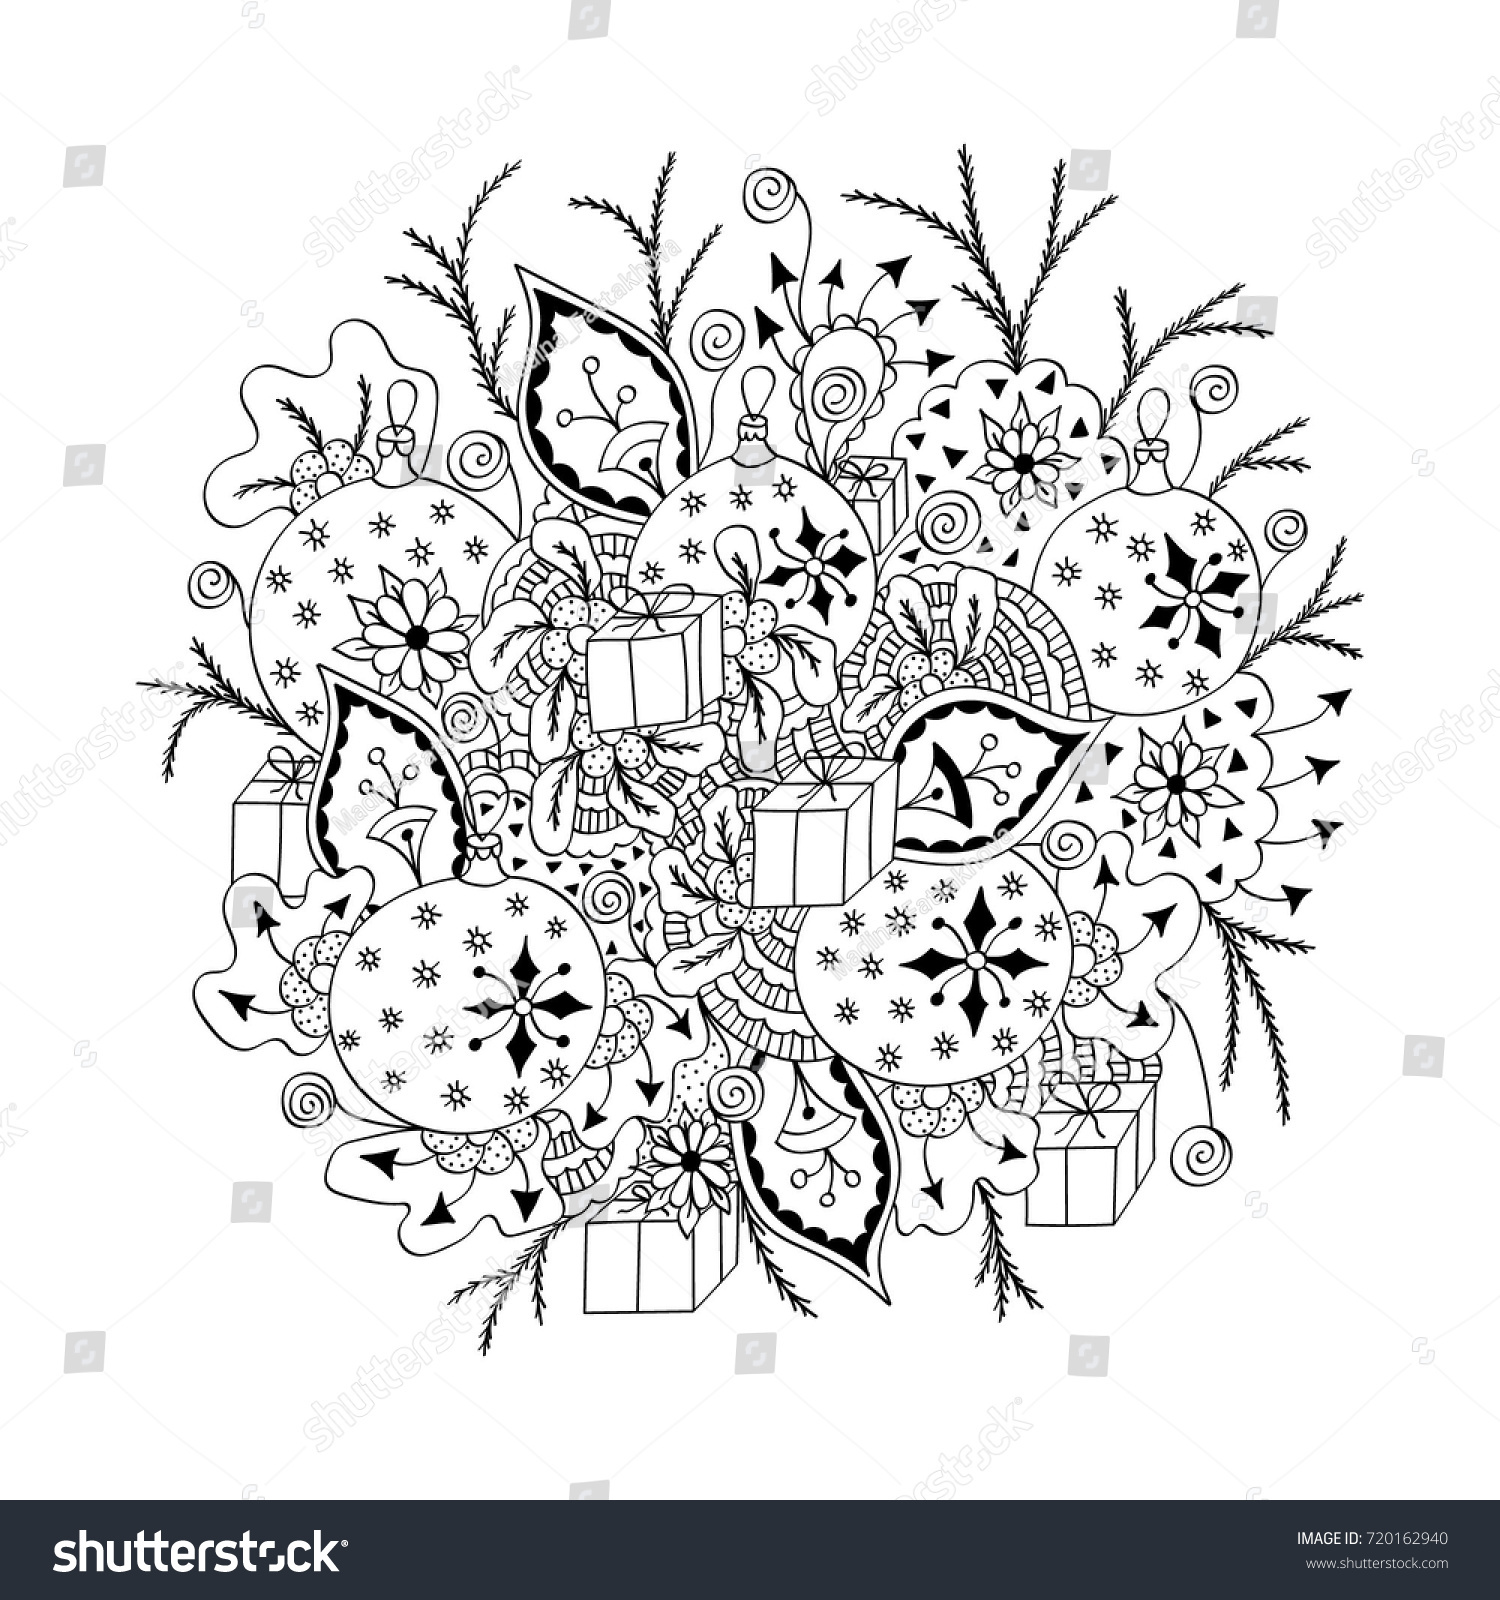 Round Doodle Art New Year Holiday Stock Vector Royalty Free